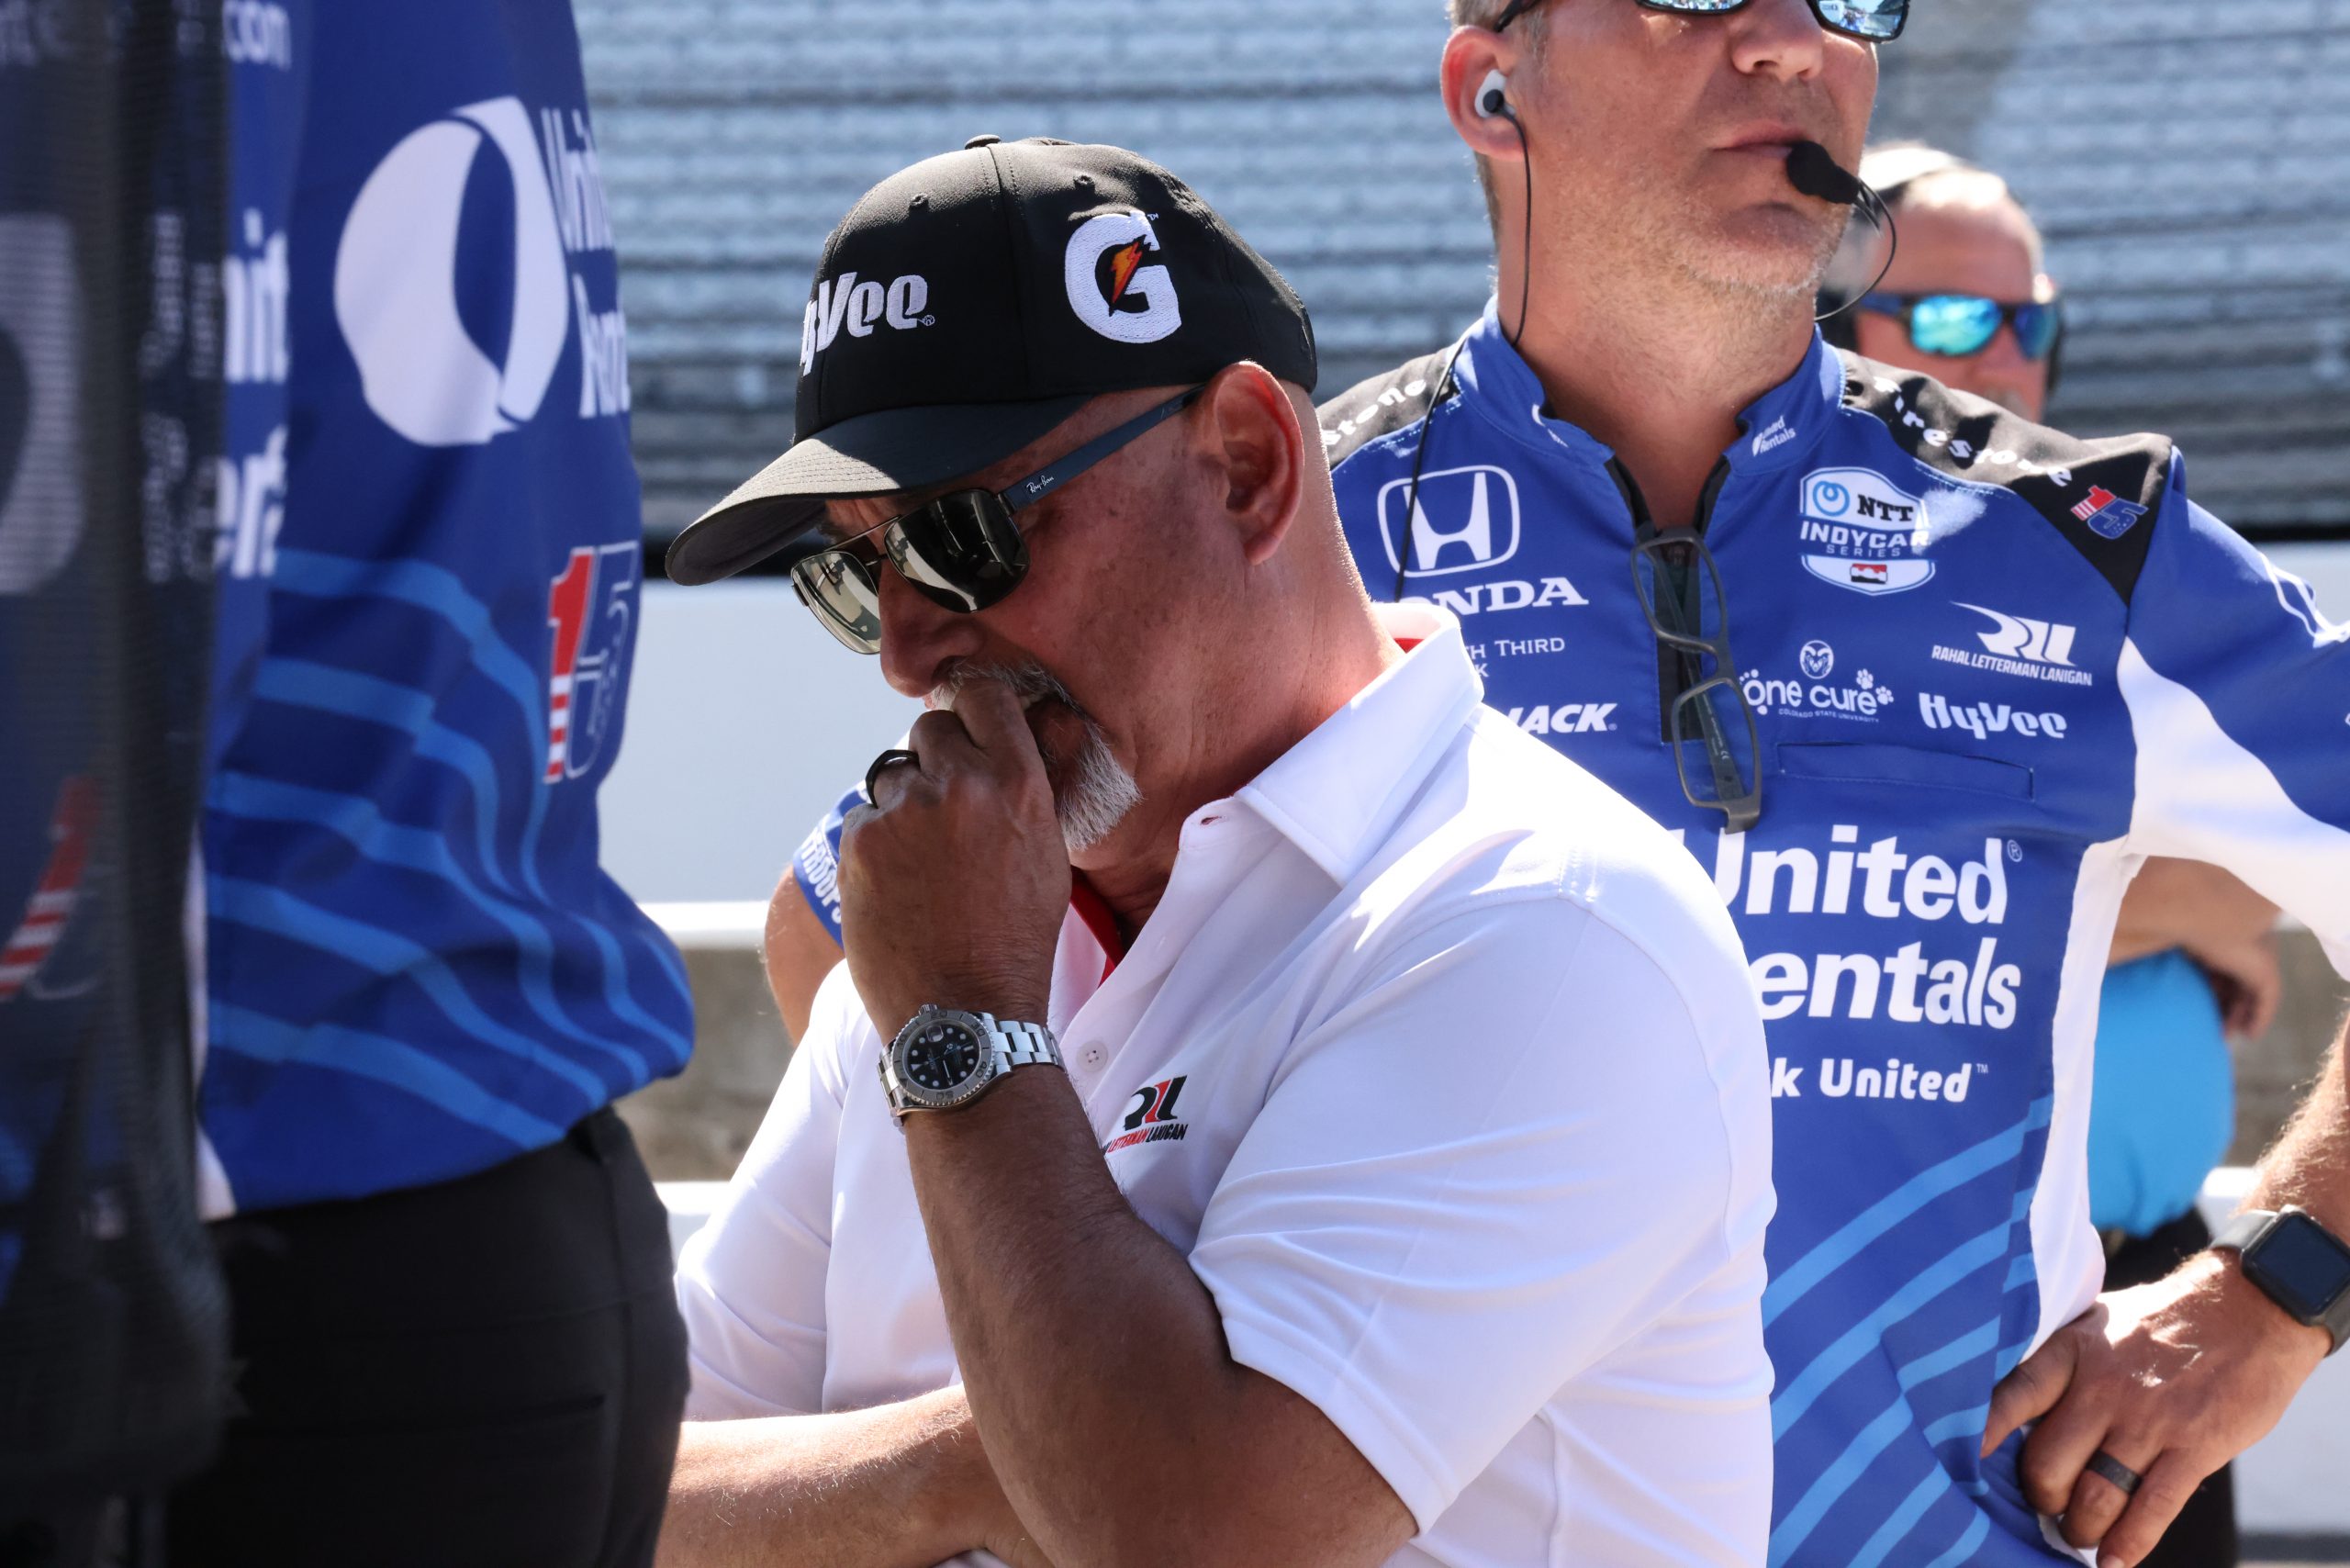 Bobby Rahal watches his son miss the Indy 500 30 years after his unfortunate miss. (Photo: Luis Torres | TPF)